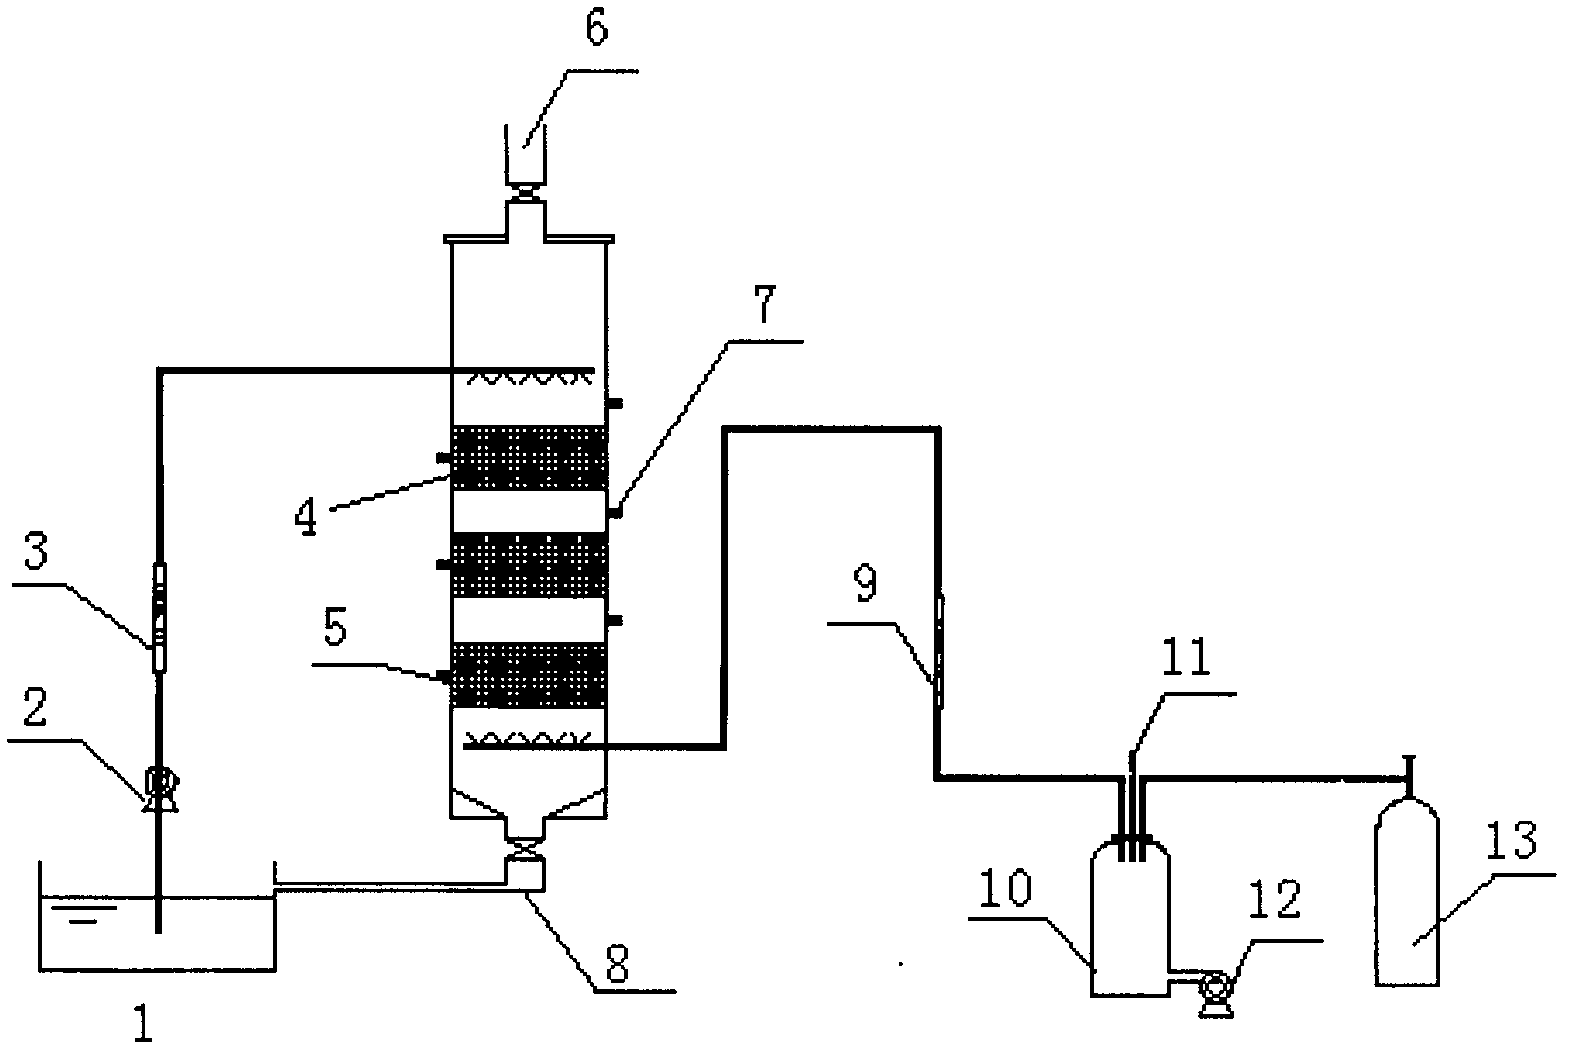 Aeromonas capable of removing hydrogen sulfide (H2S) gas in gas and usage thereof